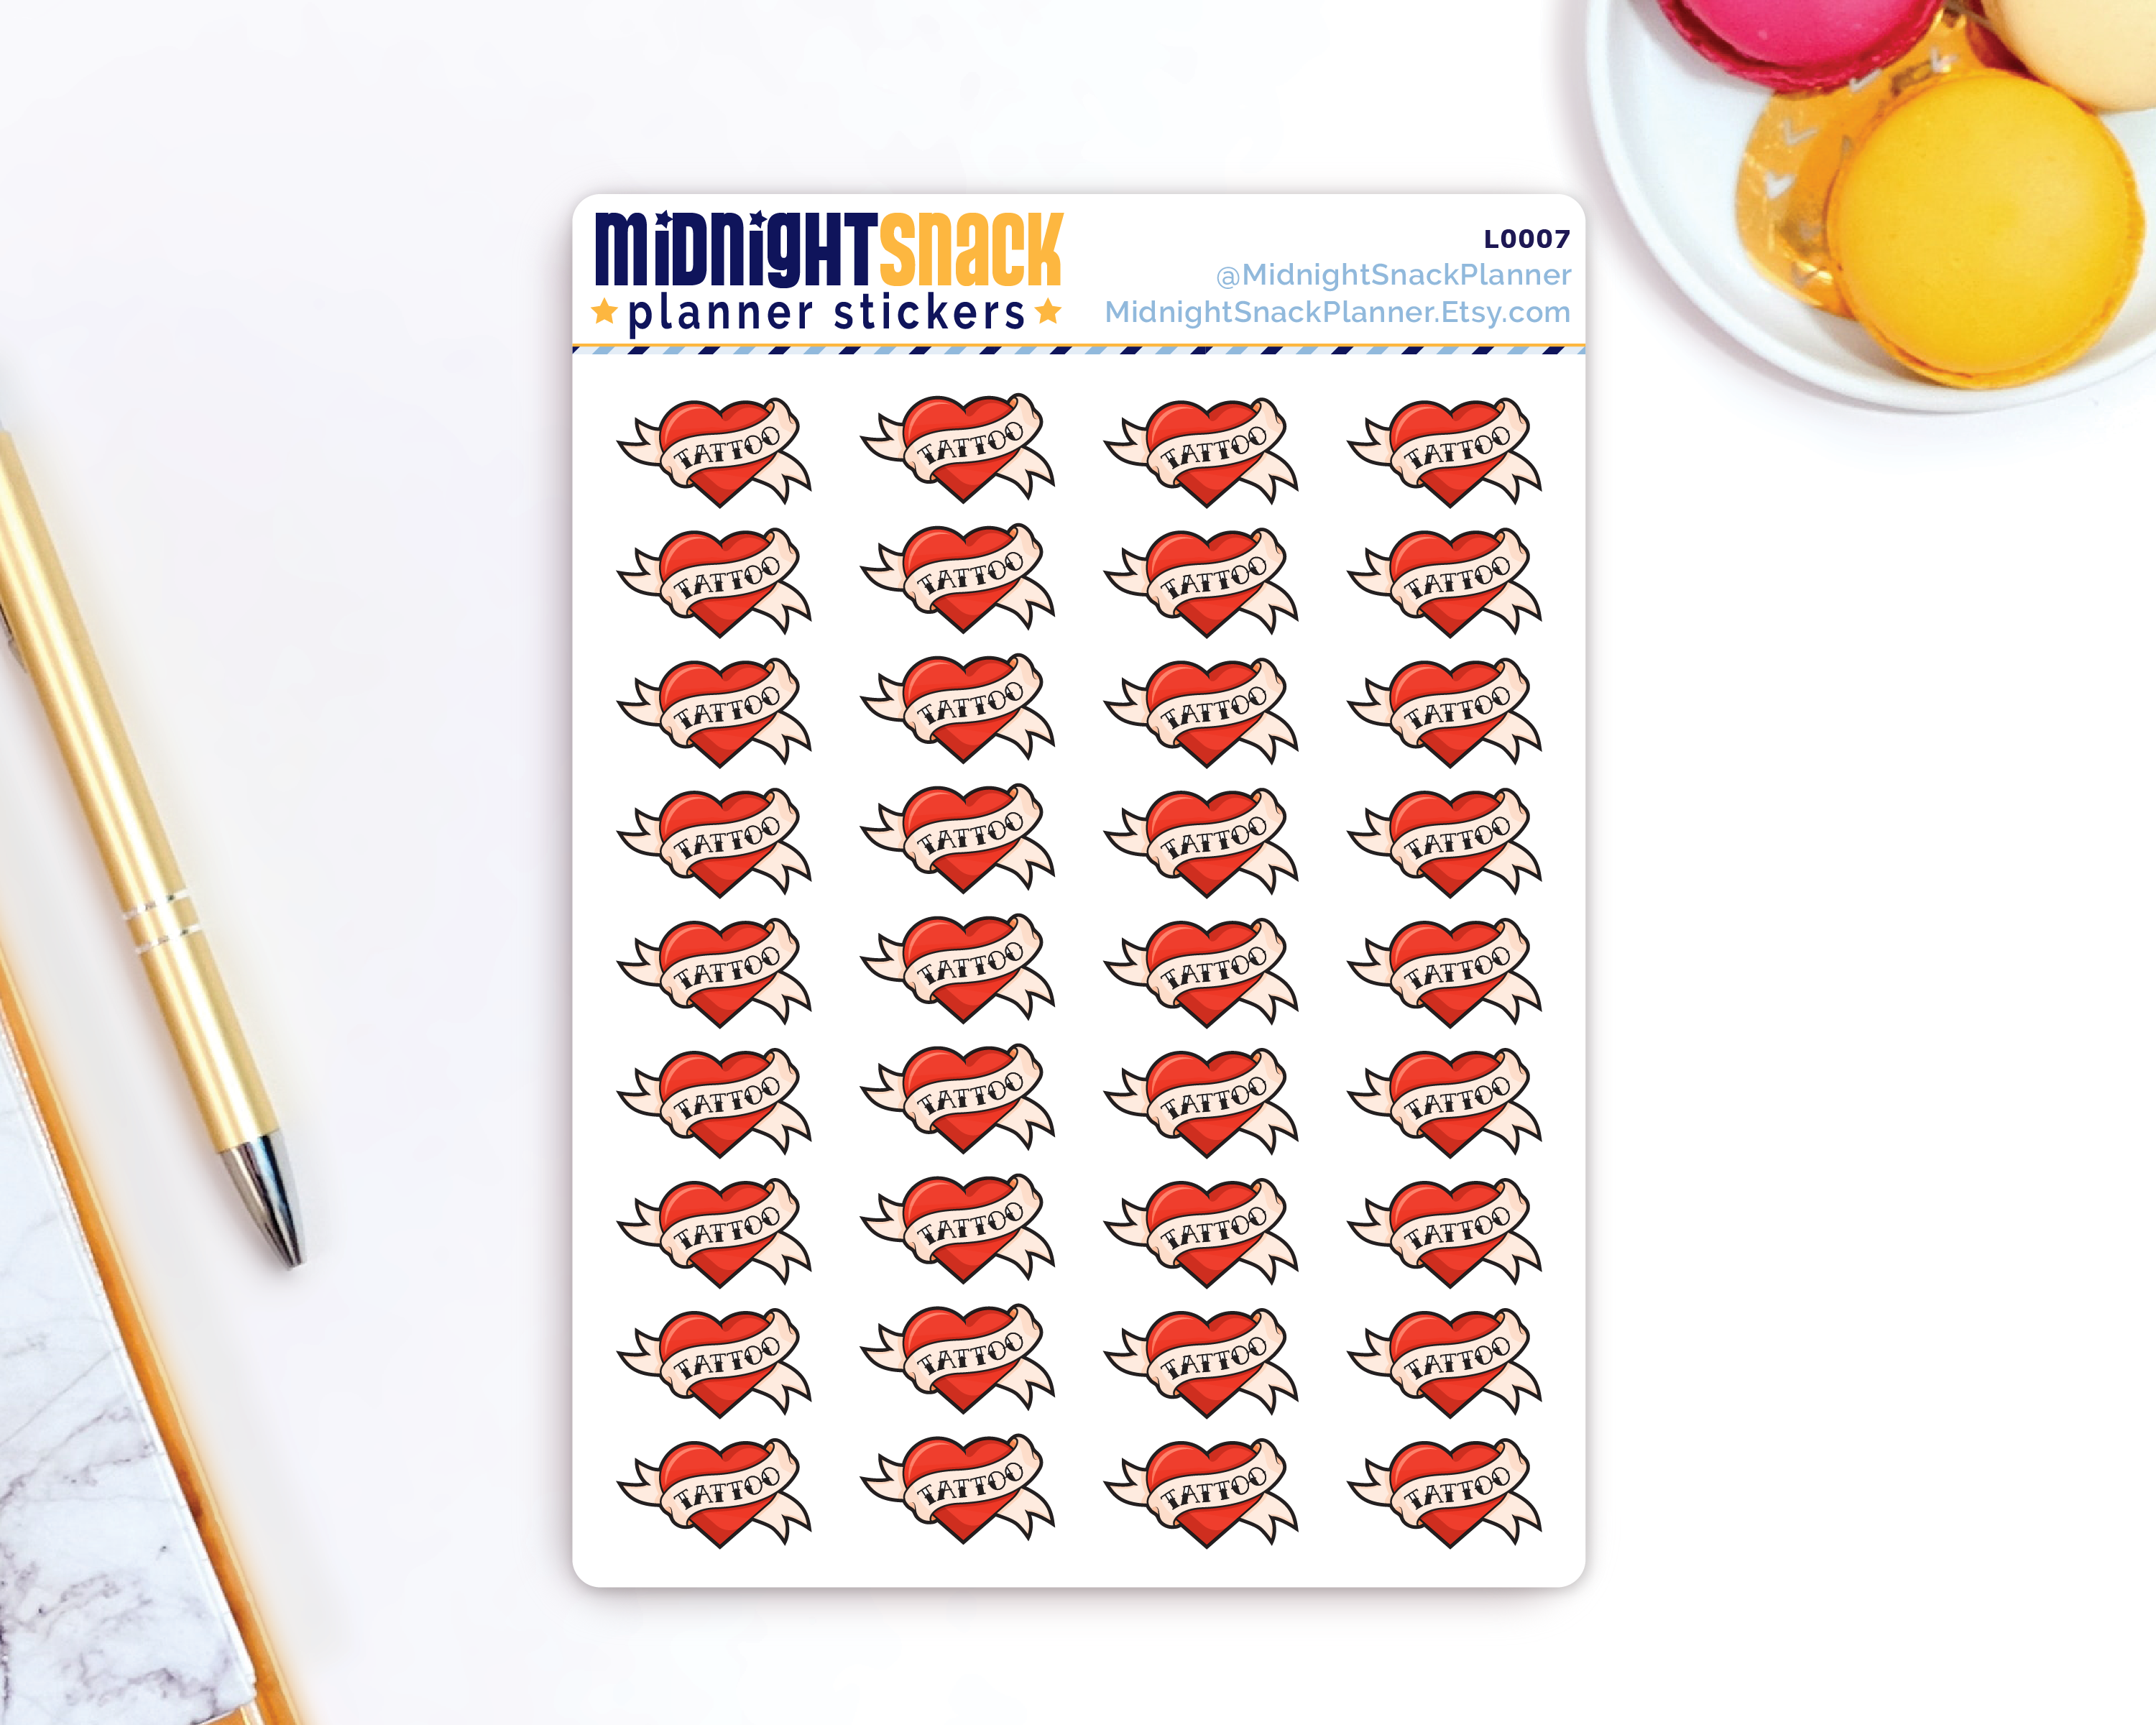 Tattoo Icon: Tattoo Appointment Planner Stickers Midnight Snack Planner